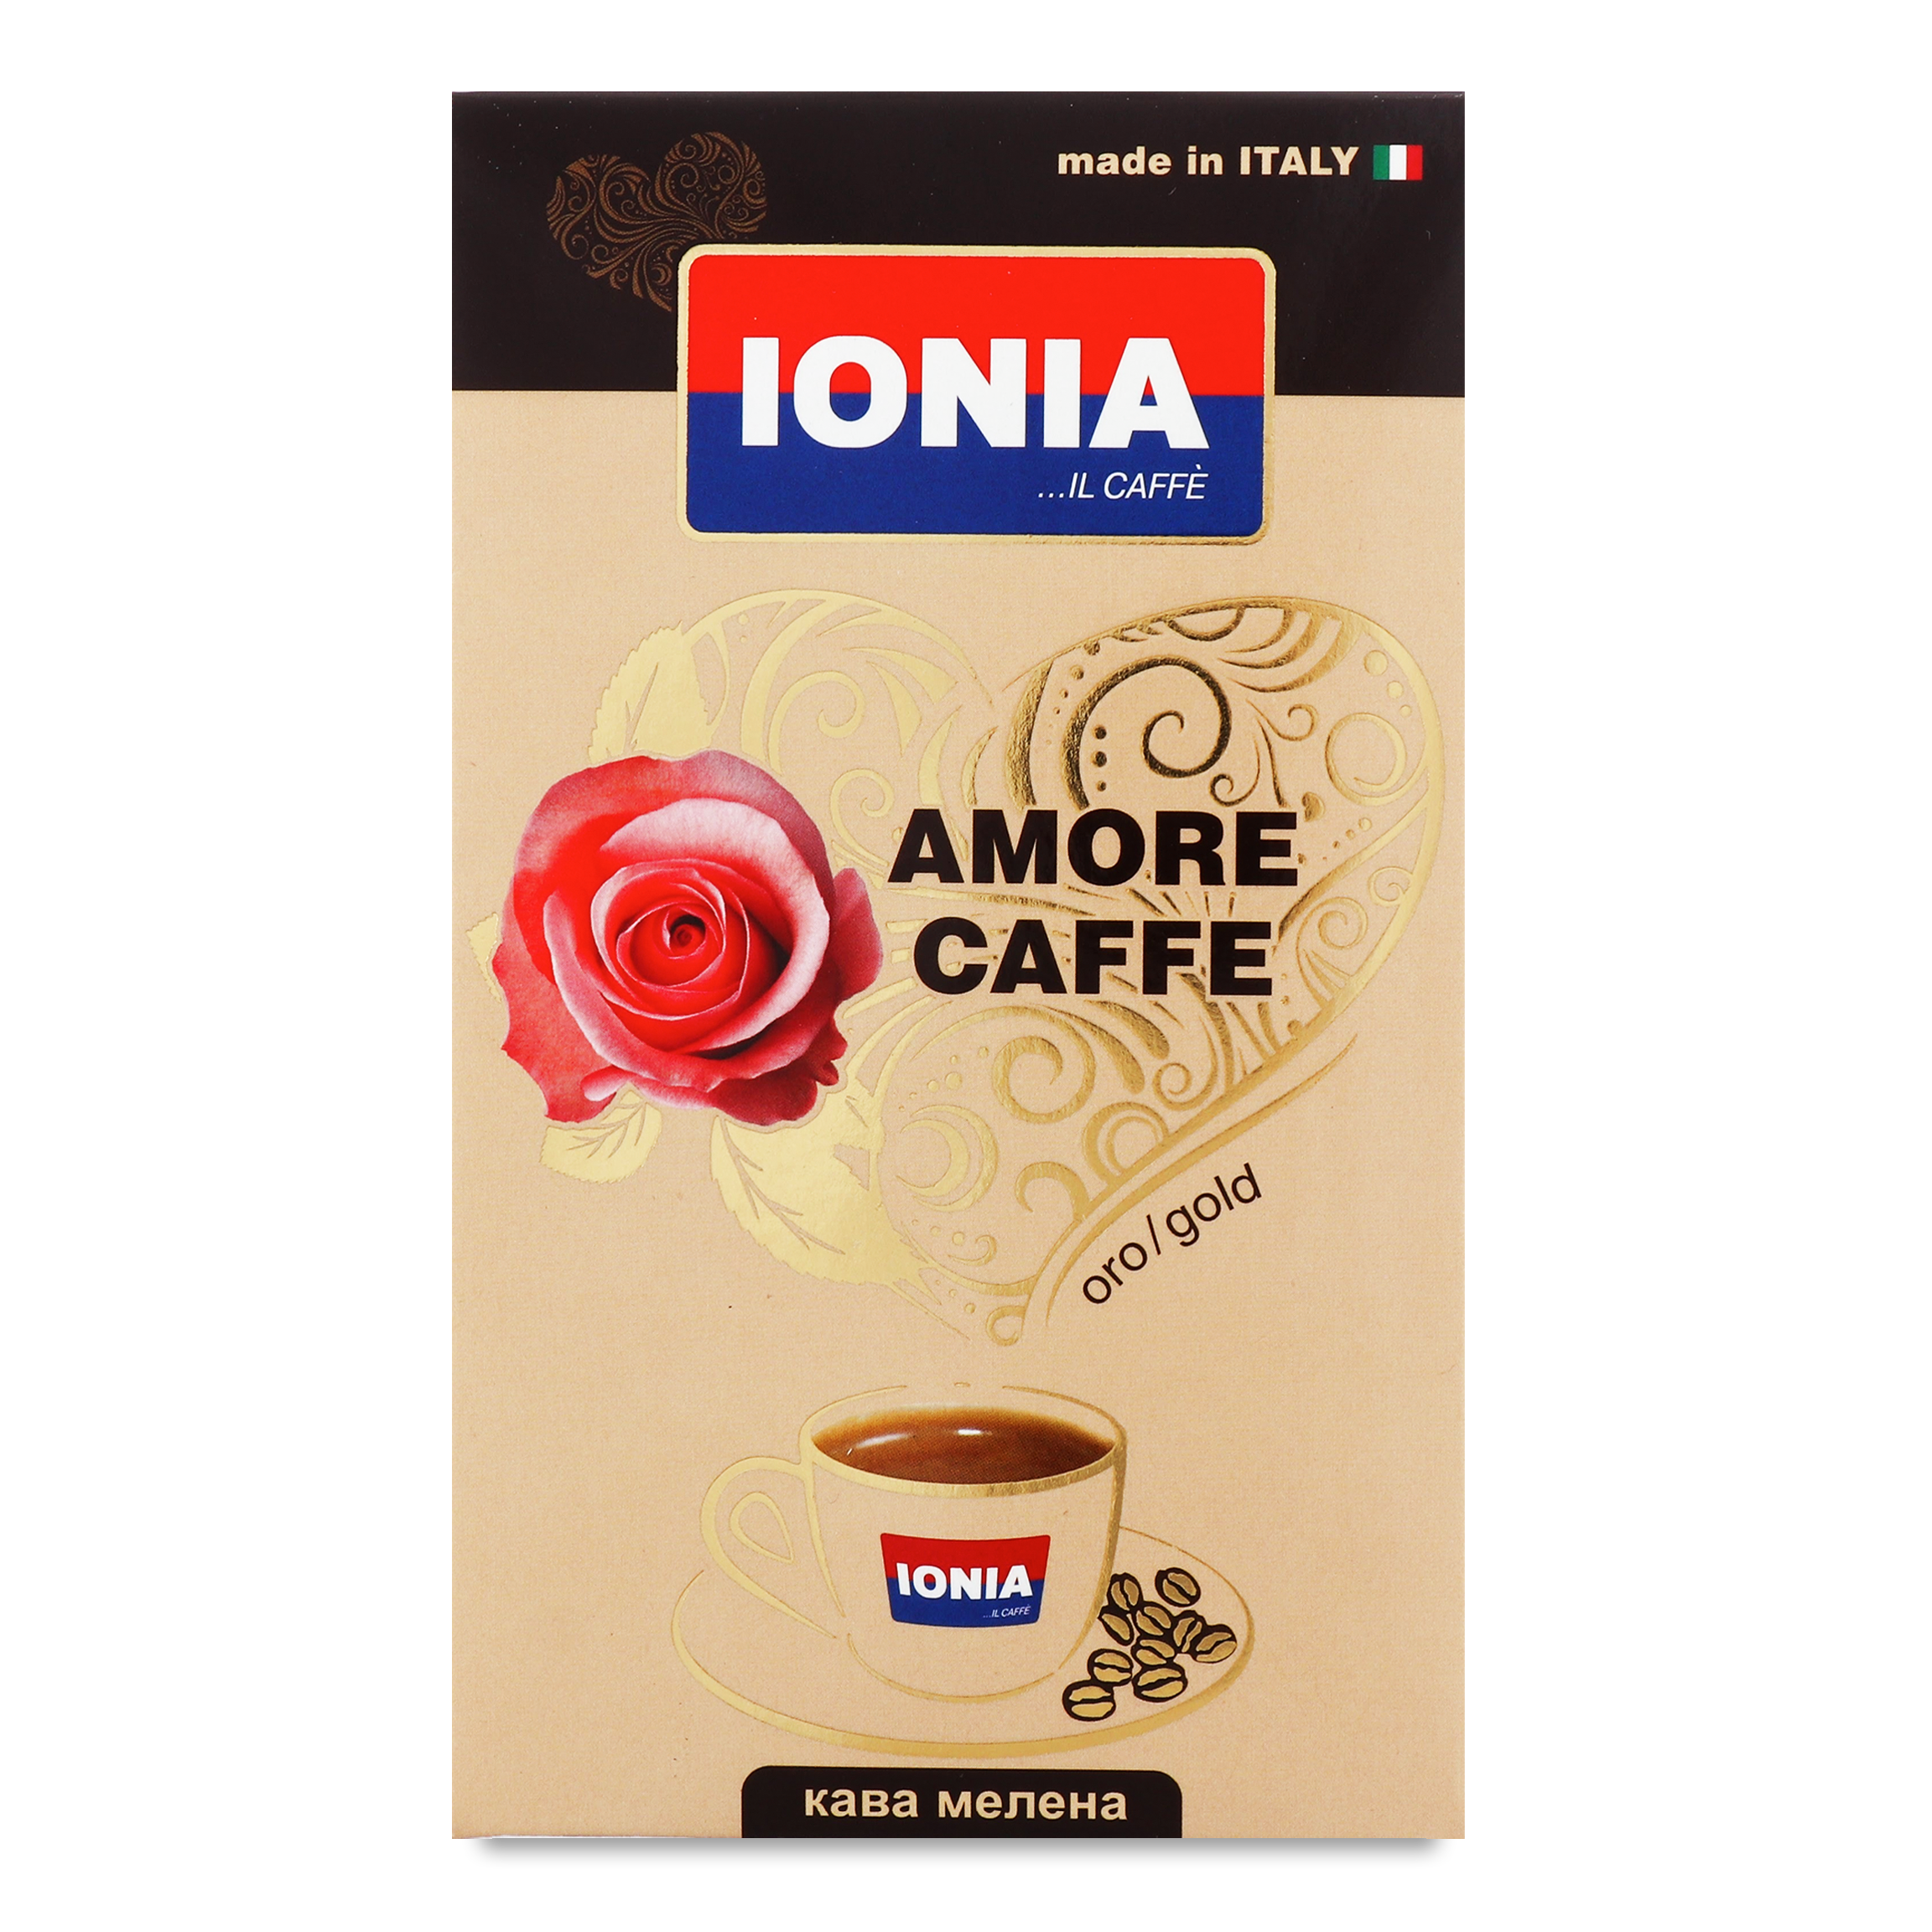 Ionia Espresso Aromatica Gold Natural Roasted Ground Coffee 250g Italy